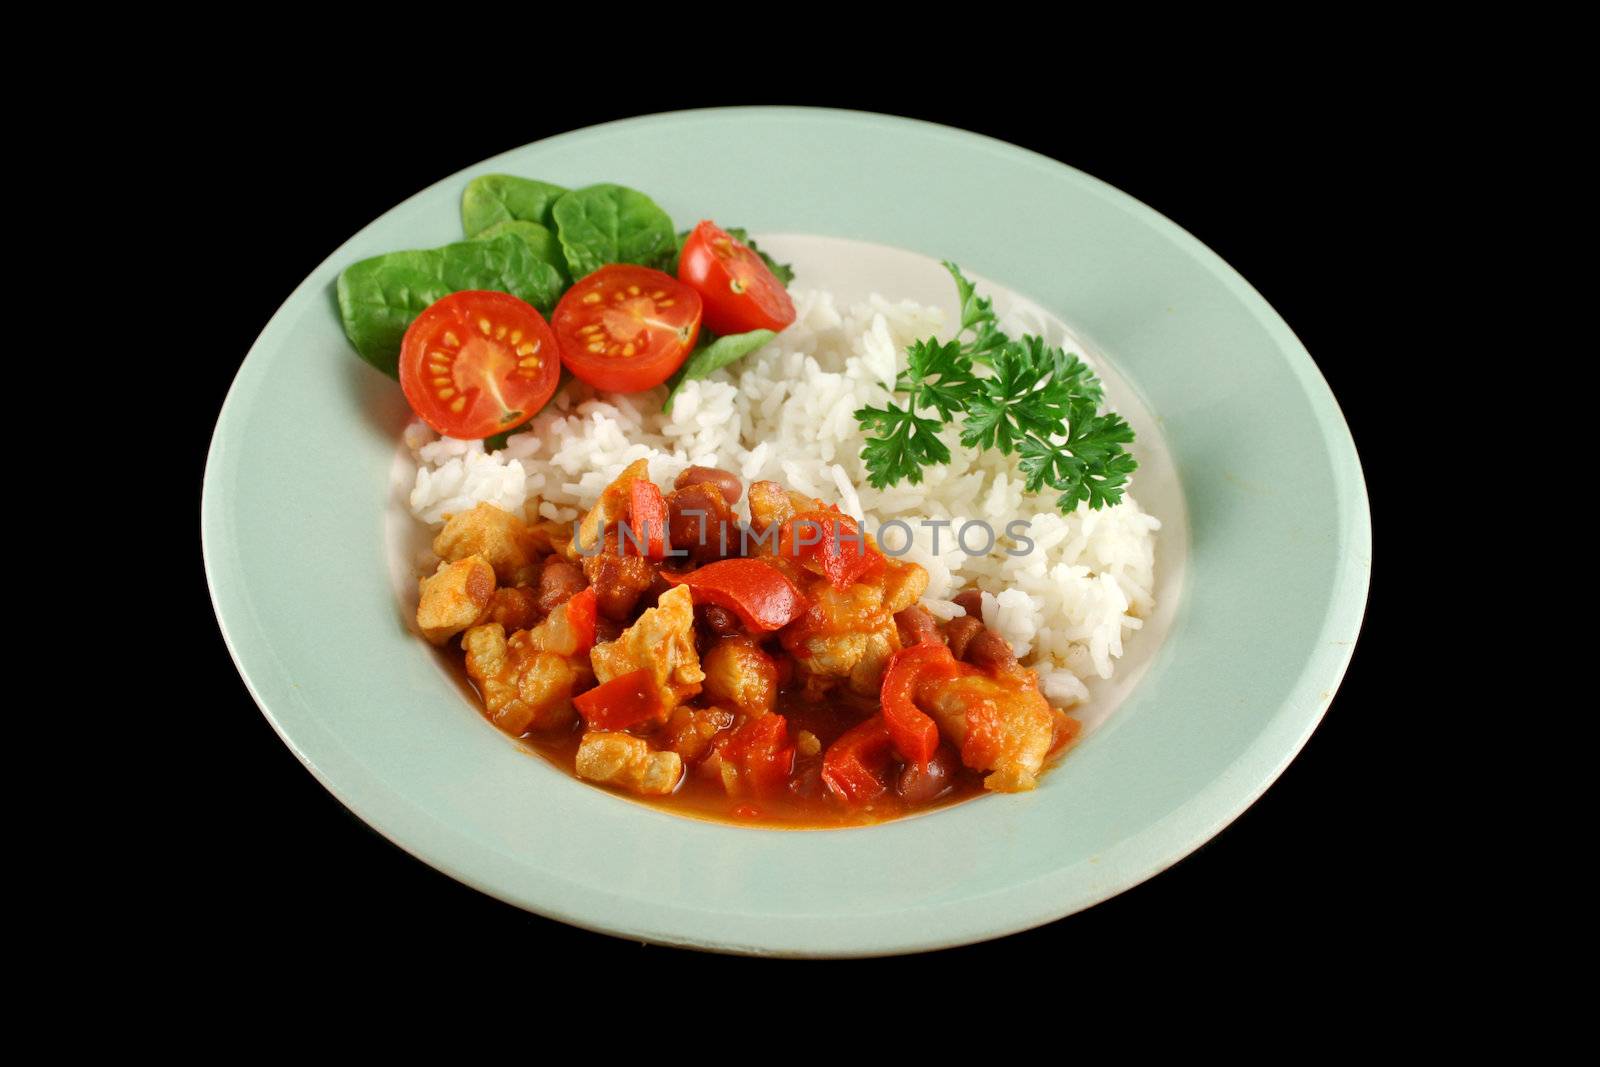 Spicy chicken lentil and pepper stew with rice and a fresh garden salad.